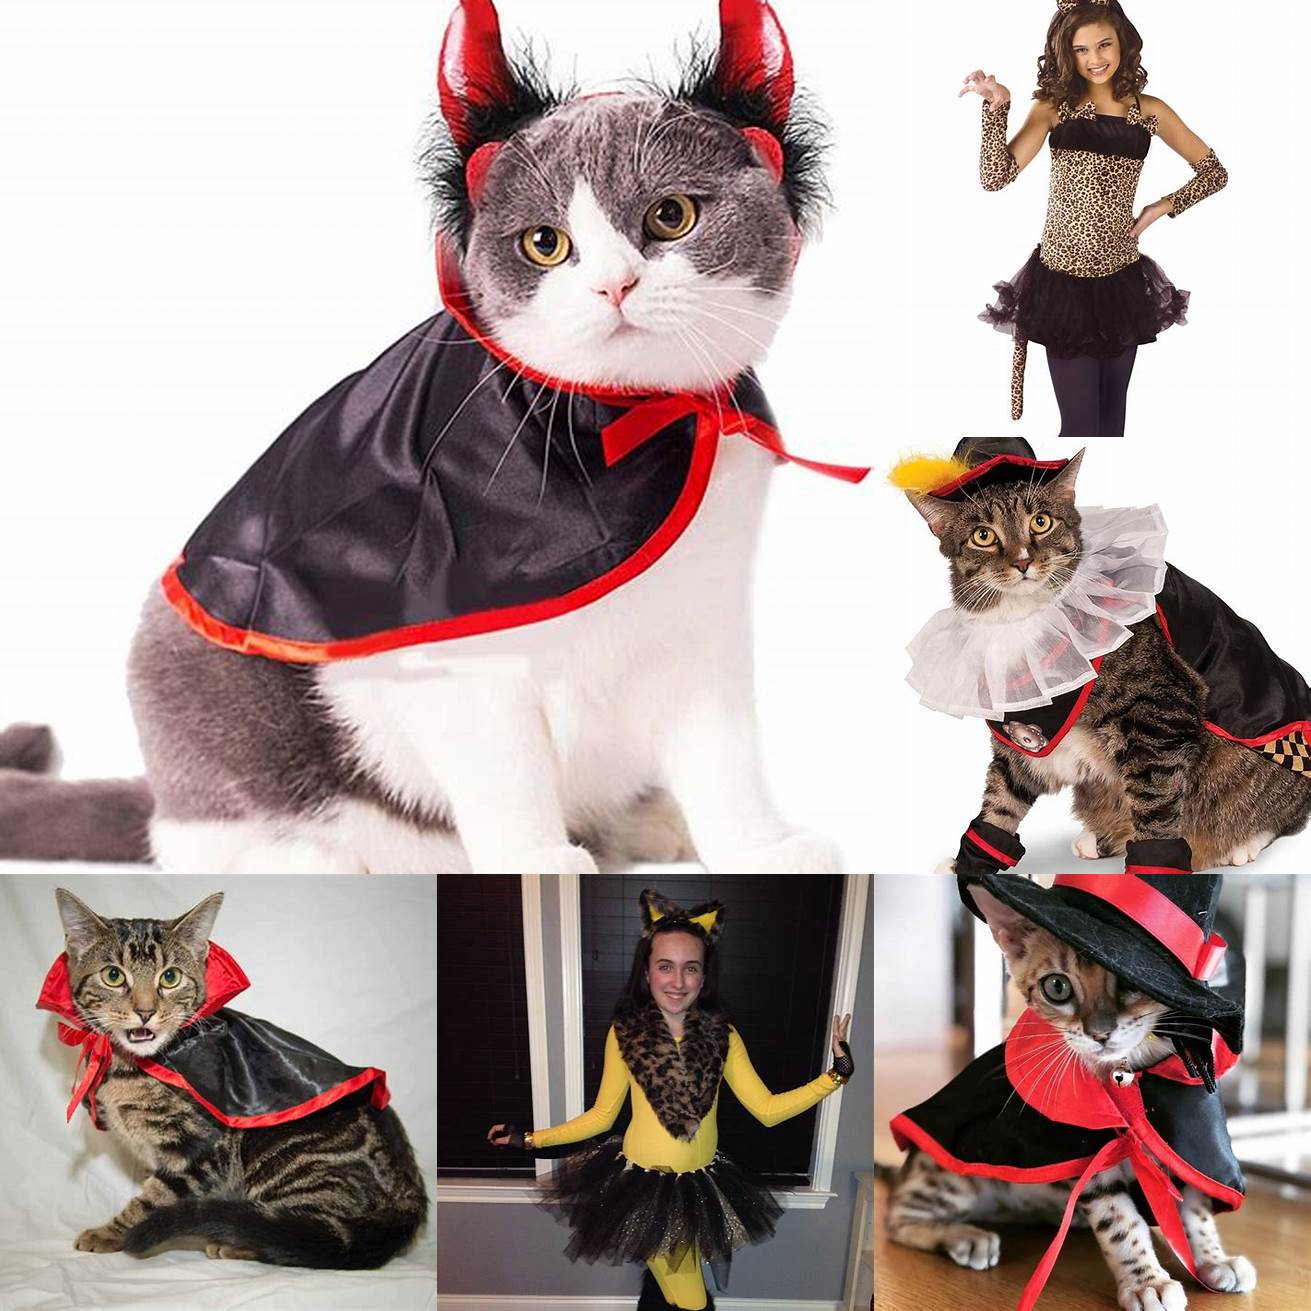 Q Can I add other accessories to the cat costume